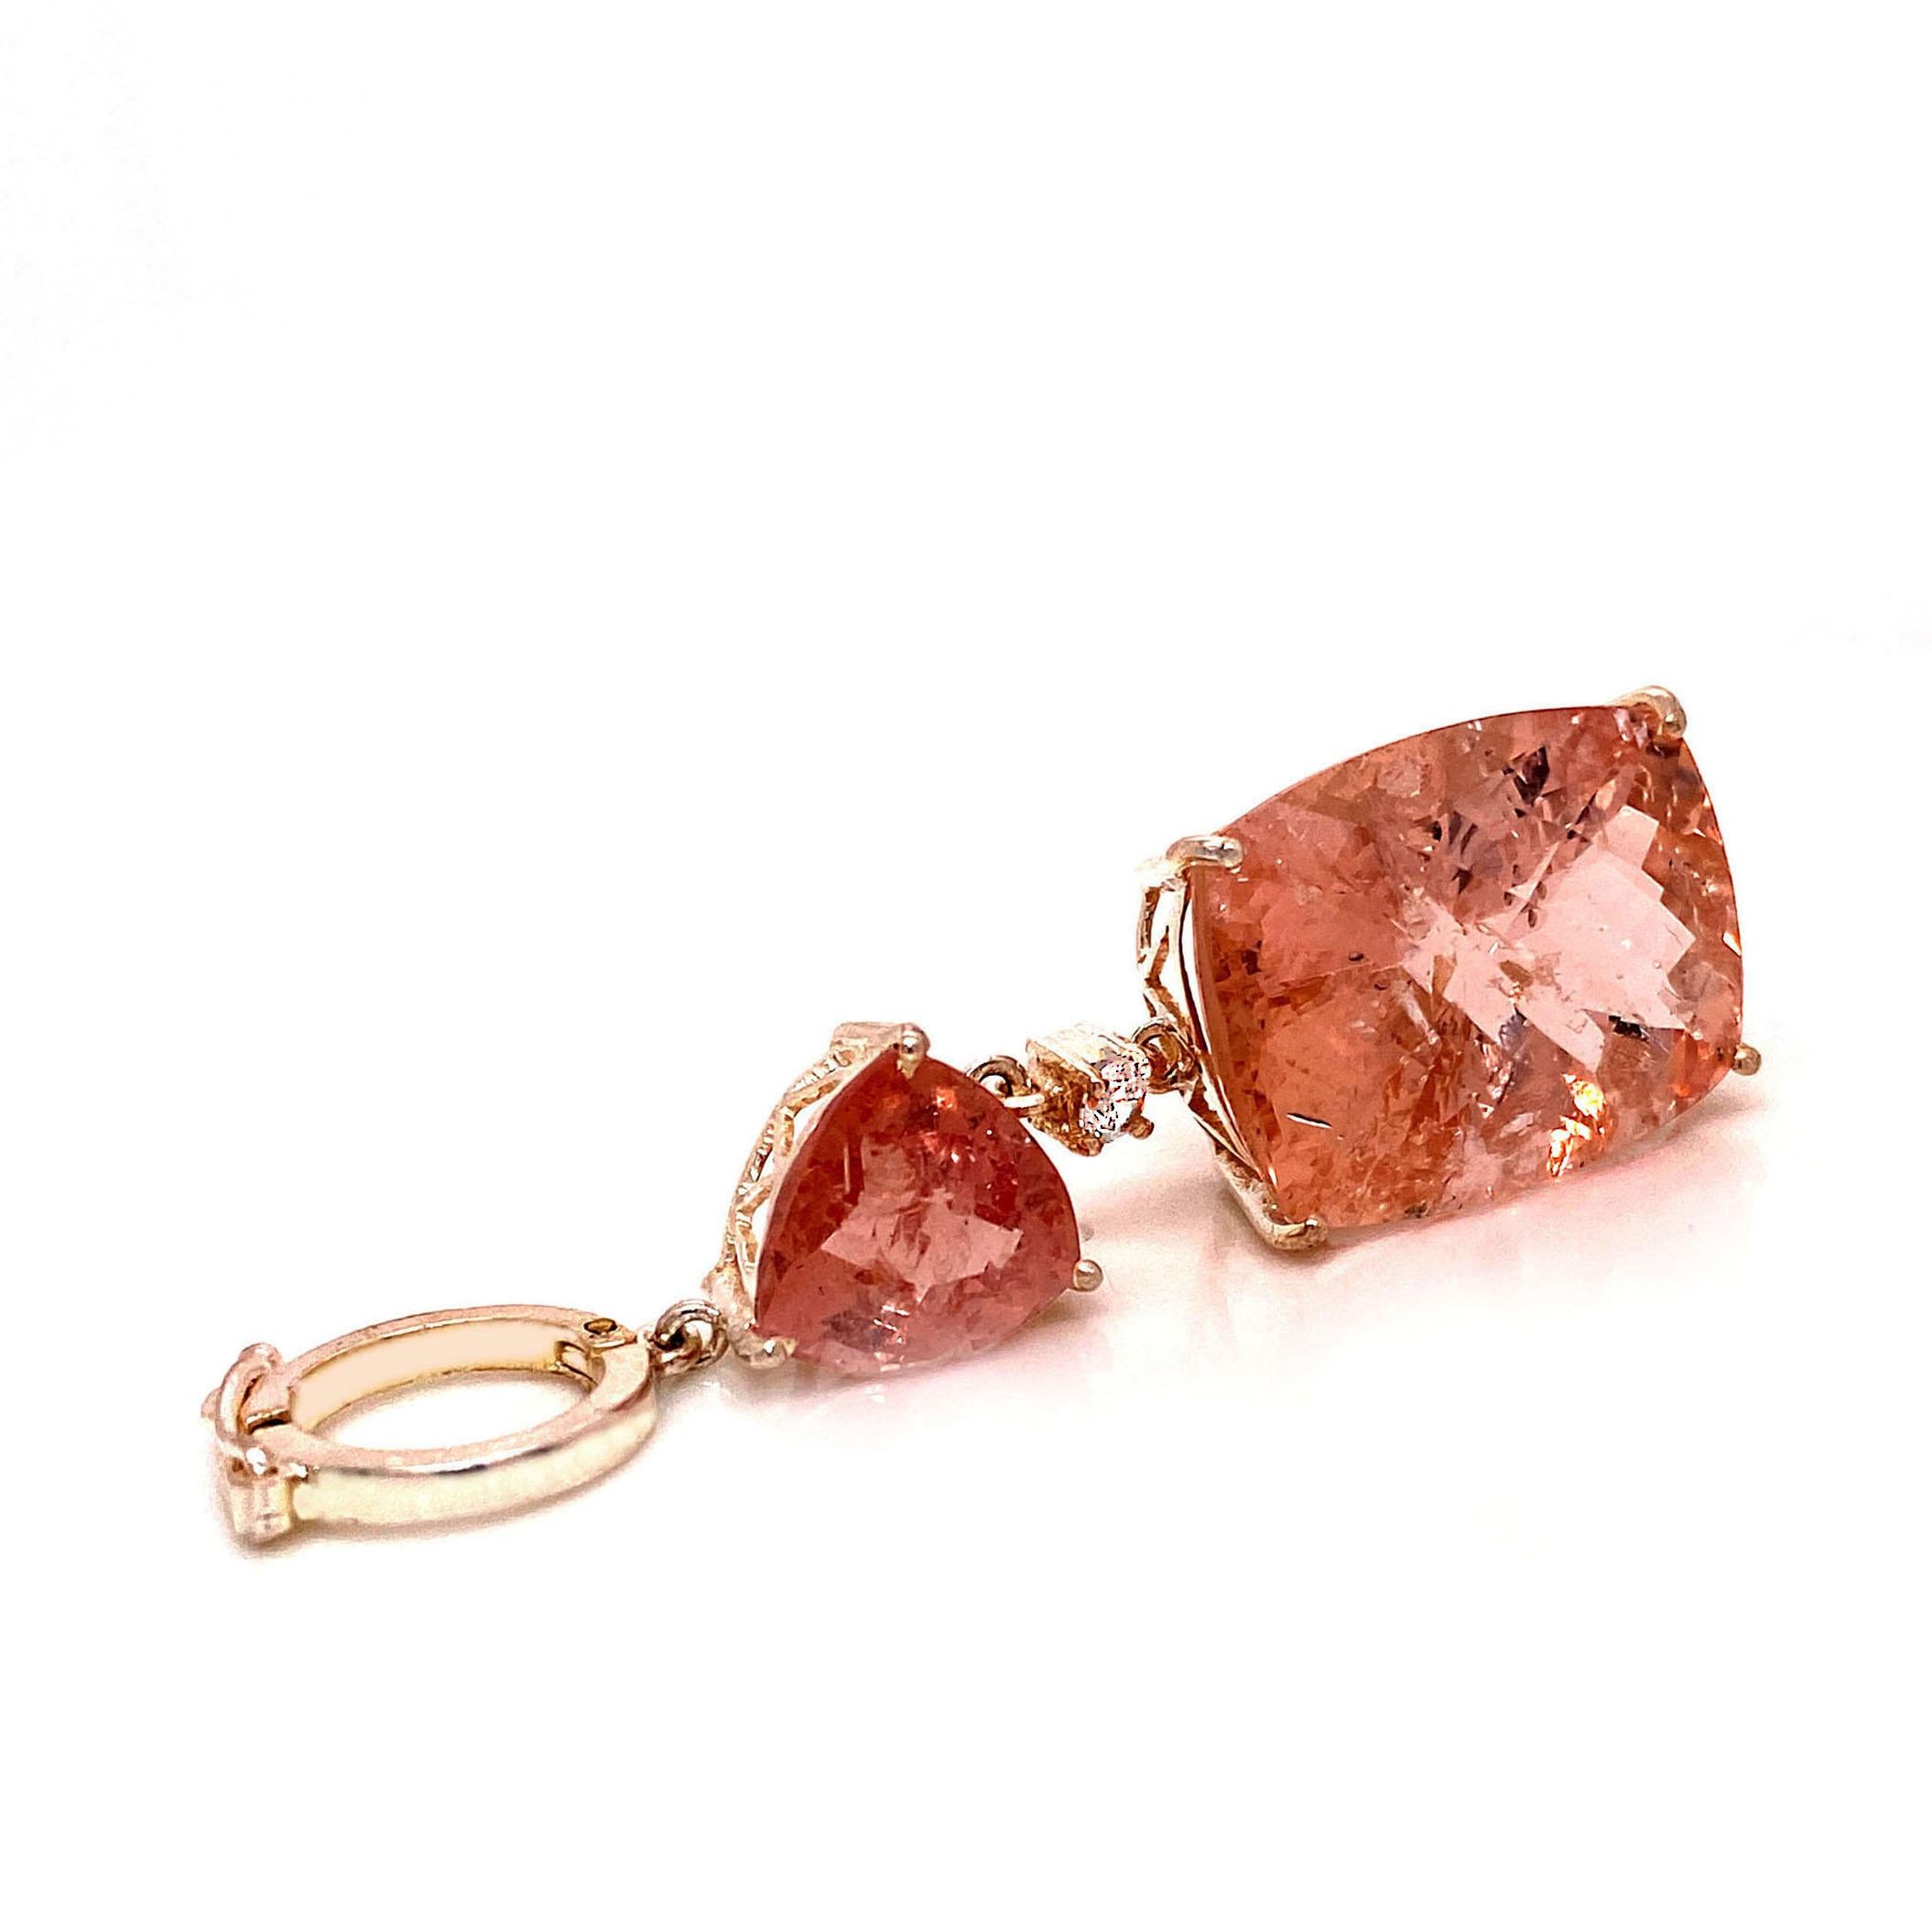 Delightful tangerine color Morganites create this unique pendant.  Wear these gemstones for a touch of sparkle and magic.  This Gemjunky pendant features two Morganites, one is a rectangular cushion cut 19.70 carats.  The triangular Moragnite is